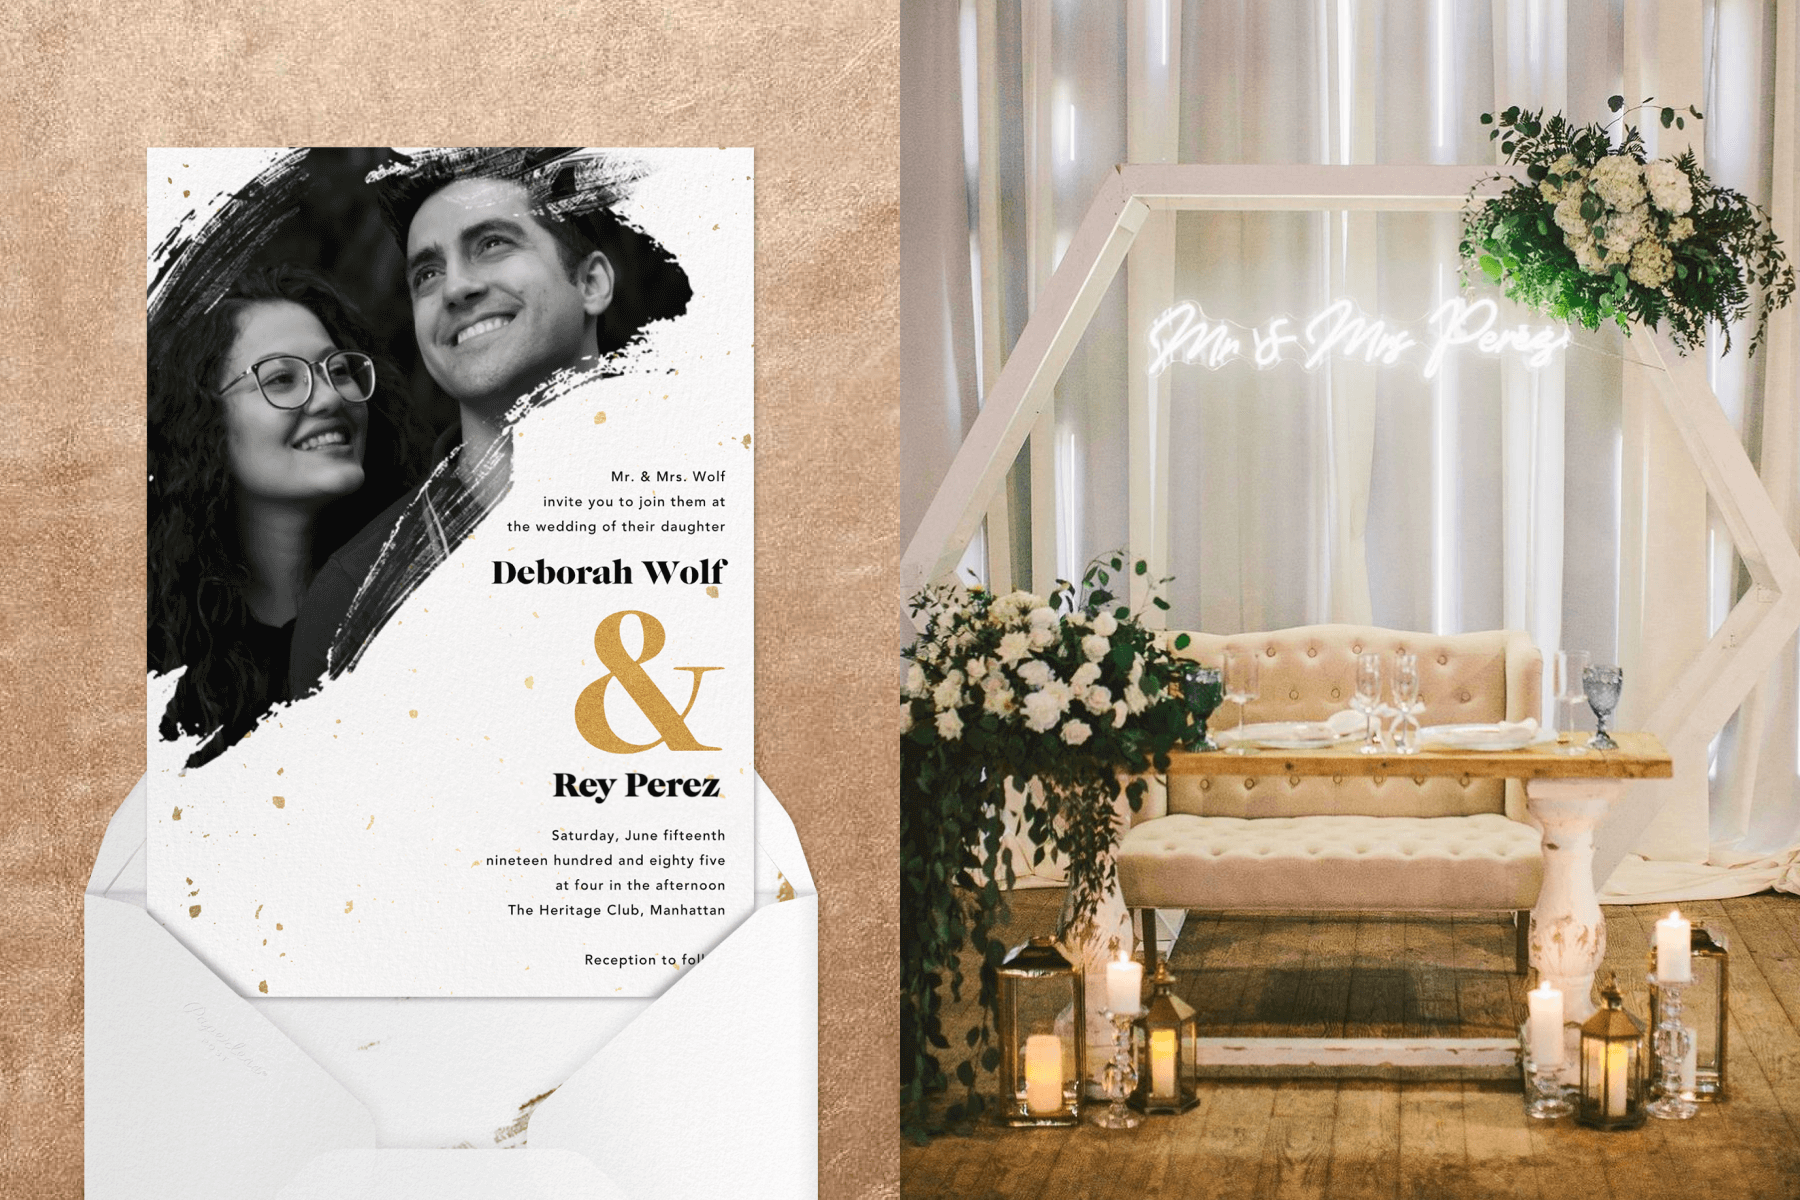 Left: A wedding invitation with a black and white picture of a man and woman in a painterly border. Right: A sweetheart loveseat table with a hexagonal arbor and a neon name sign.